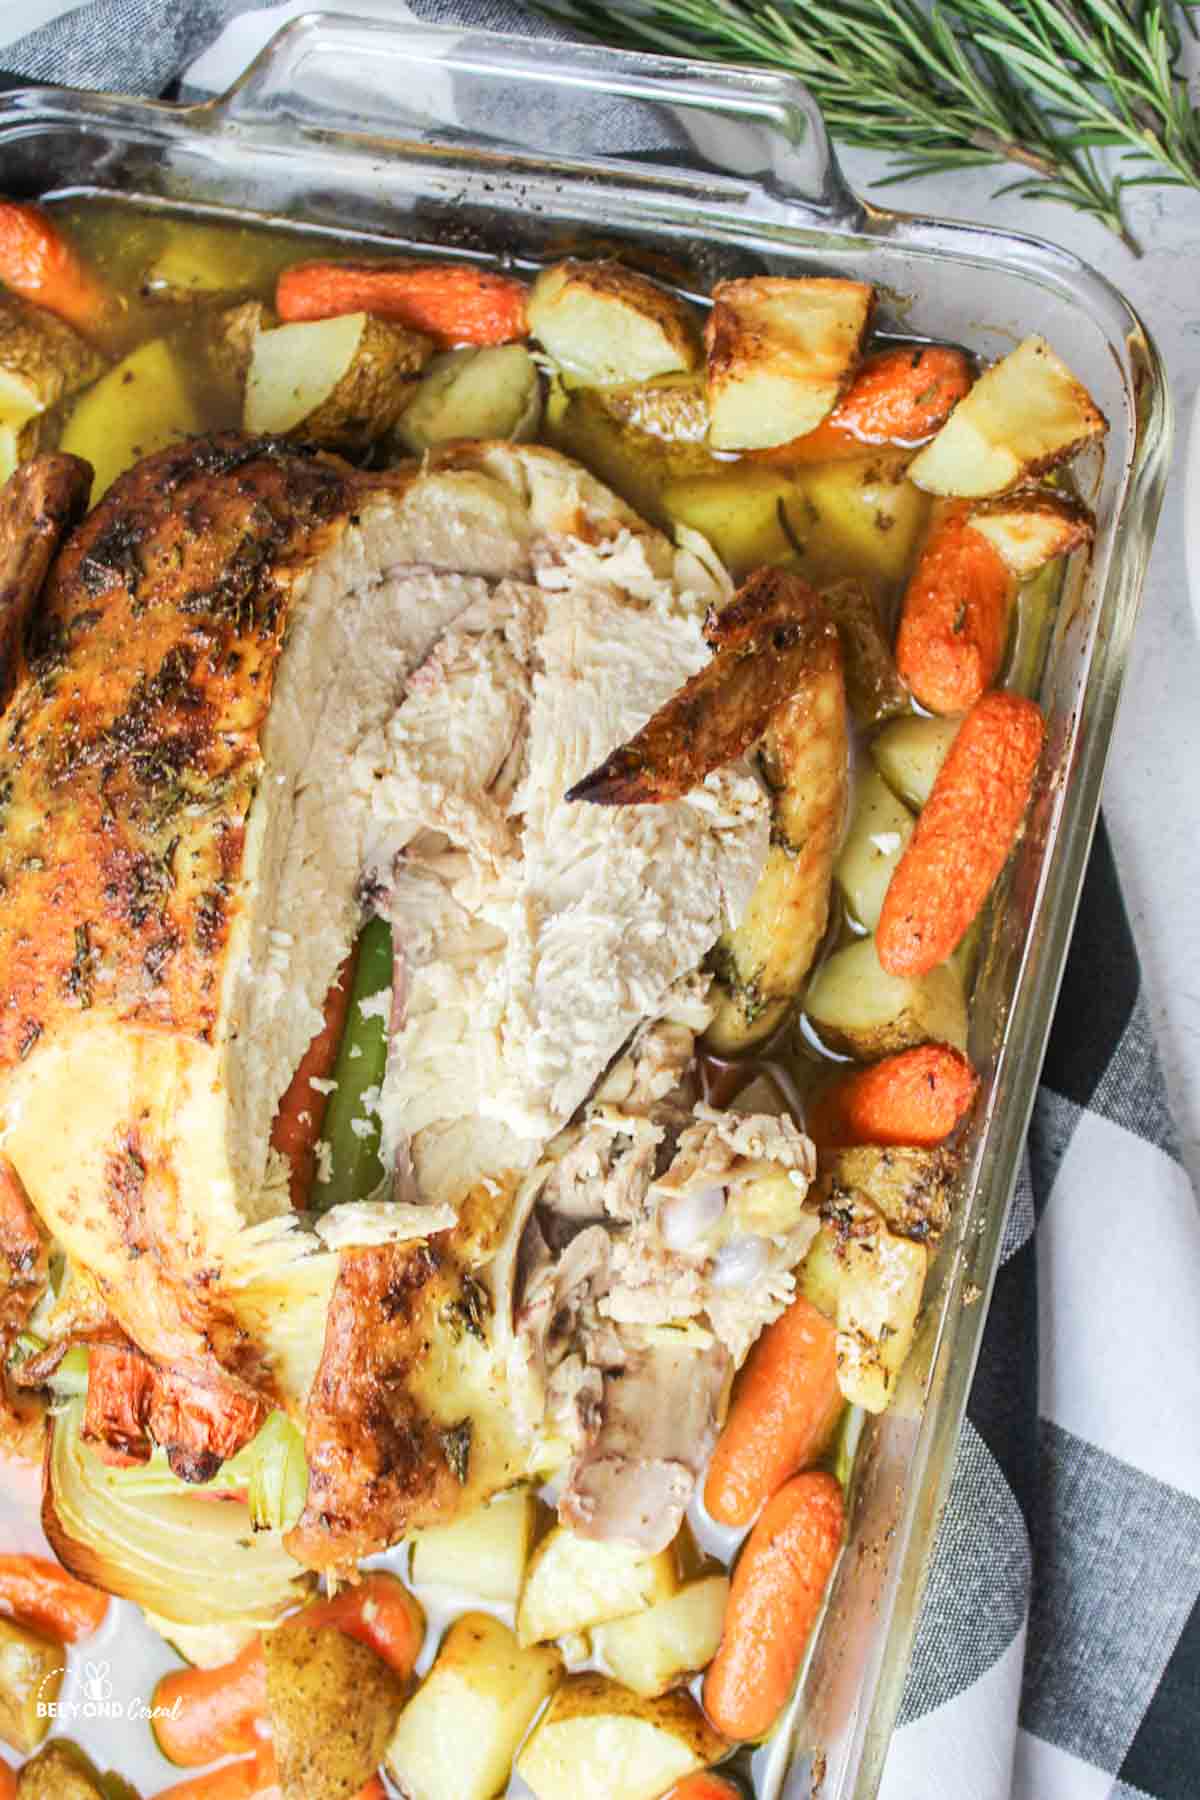 sliced chicken in a baking dish with carrots and potatoes